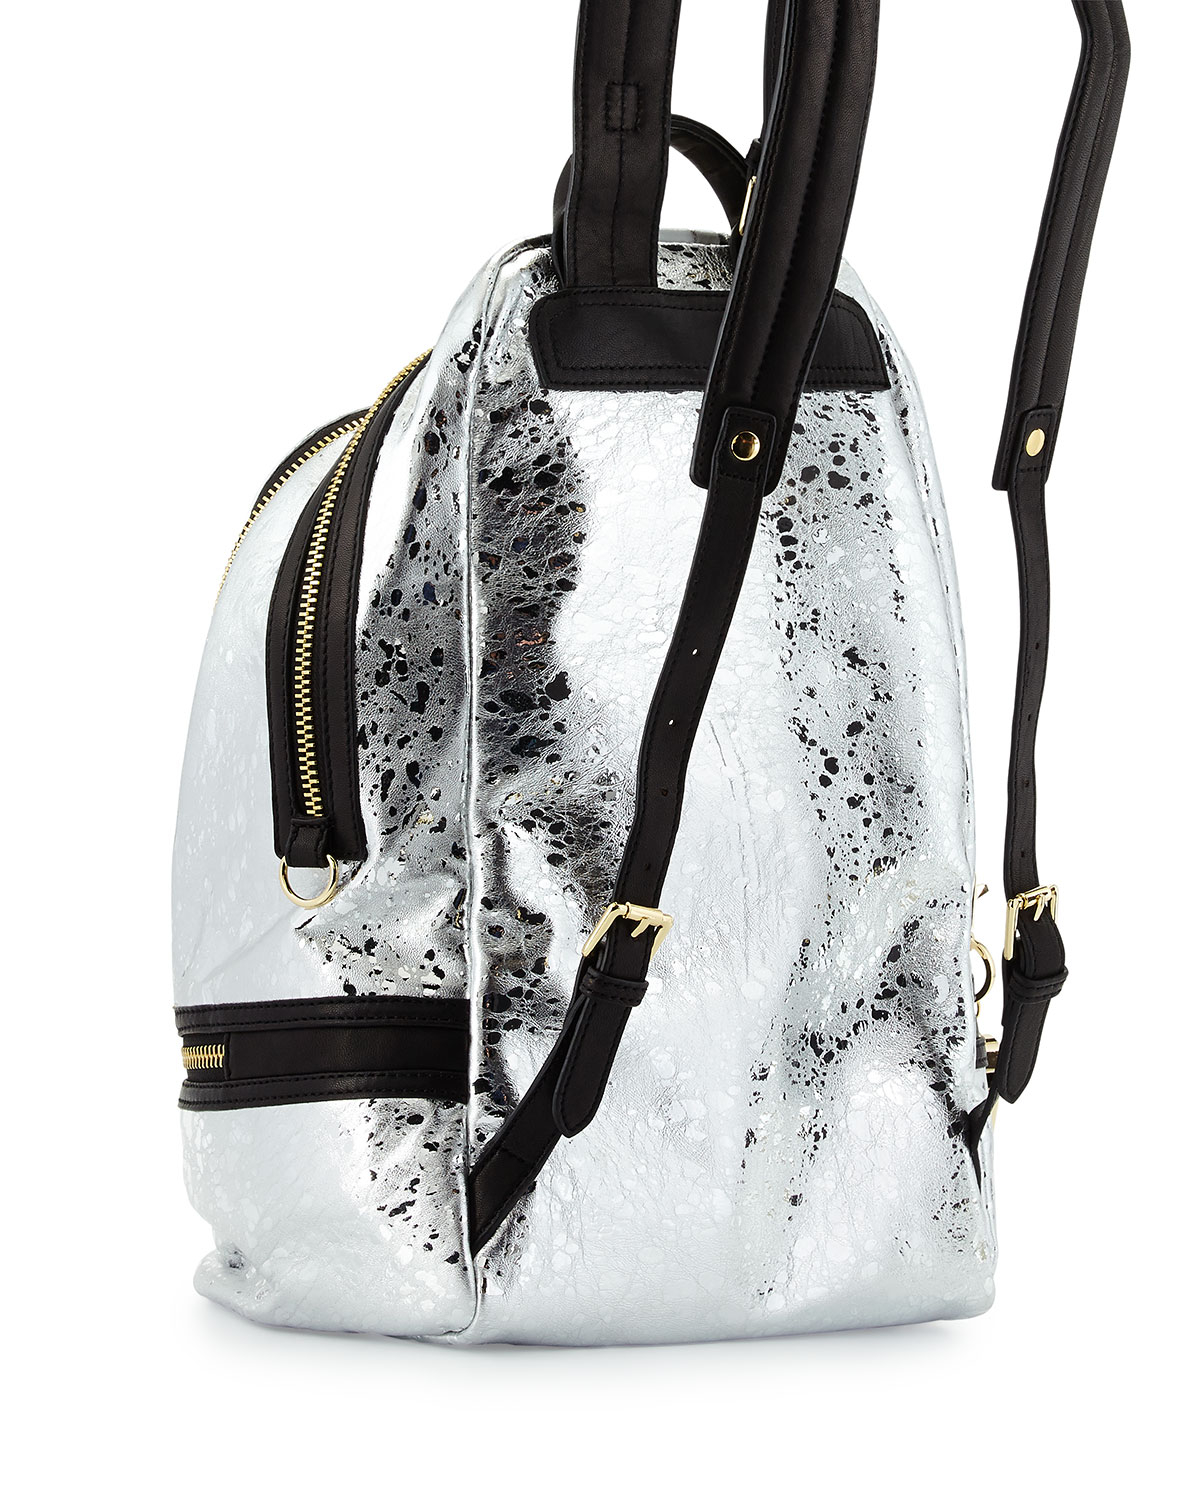 Lyst - Cynthia Rowley Pebbled Leather Brody Backpack in Metallic